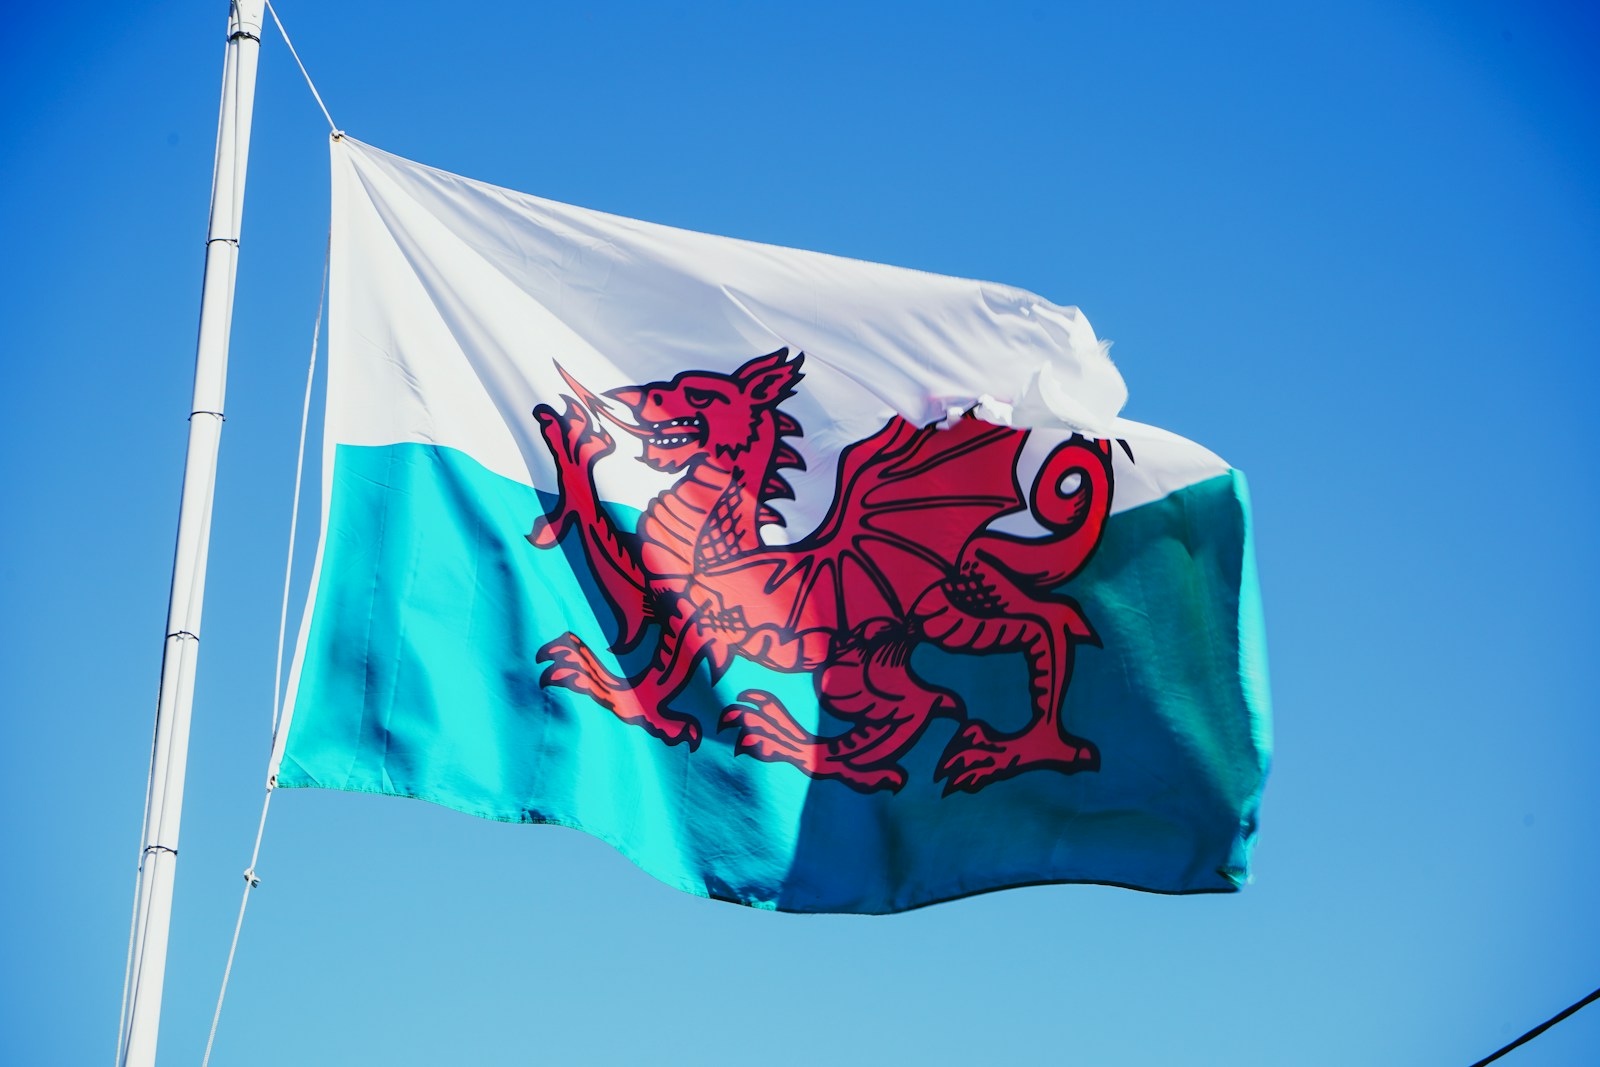 Wales red and white flag with dragon